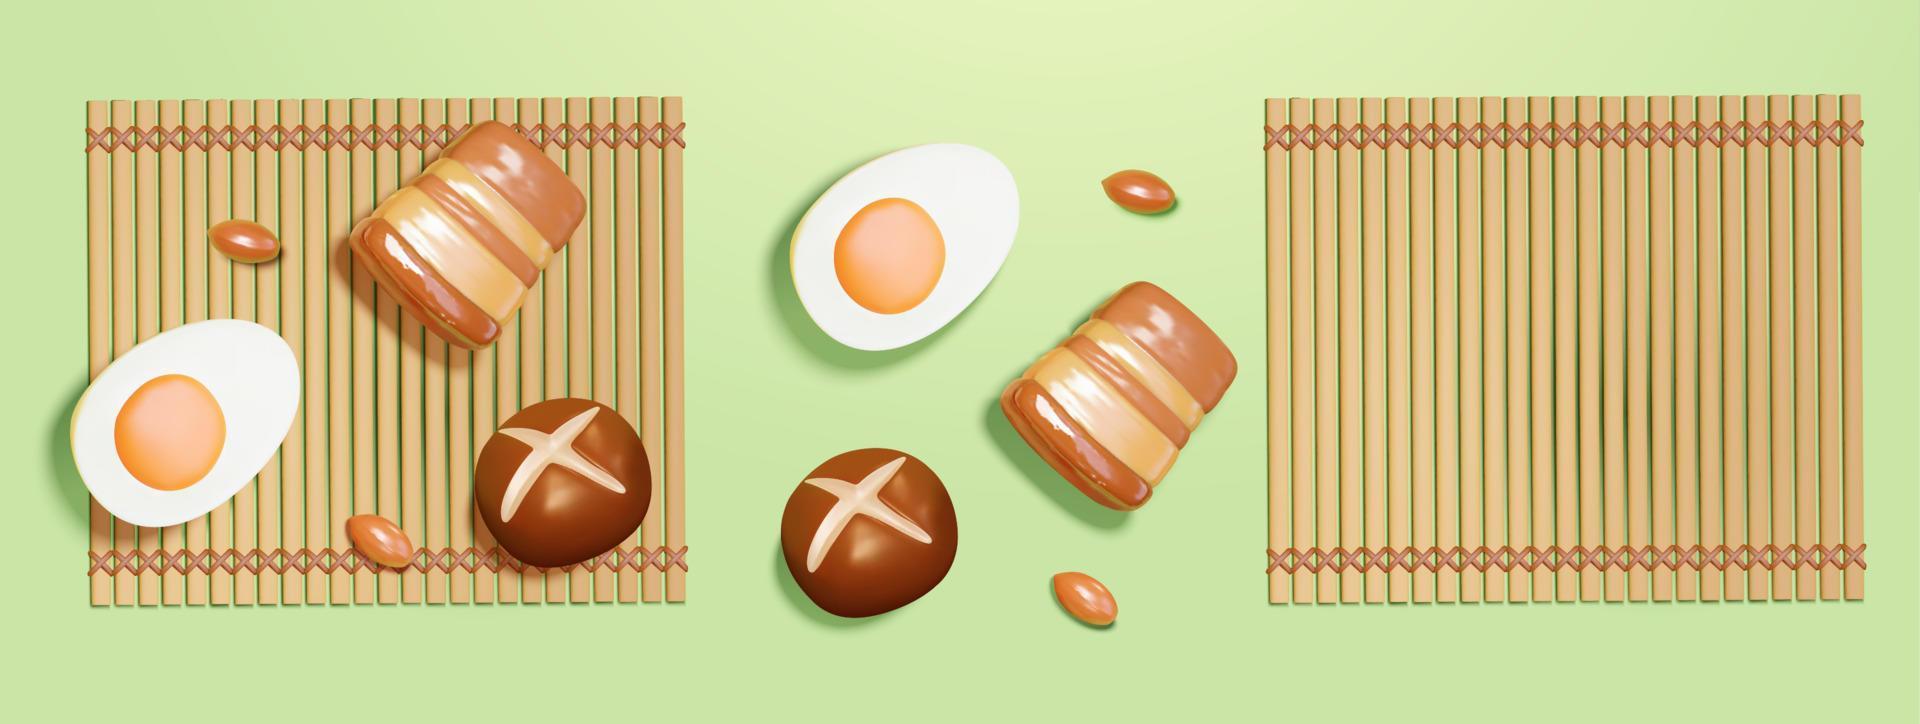 3d cartoon food ingredients of sticky rice dumpling placed on traditional bamboo mat. Duanwu Festival elements isolated on green background. vector